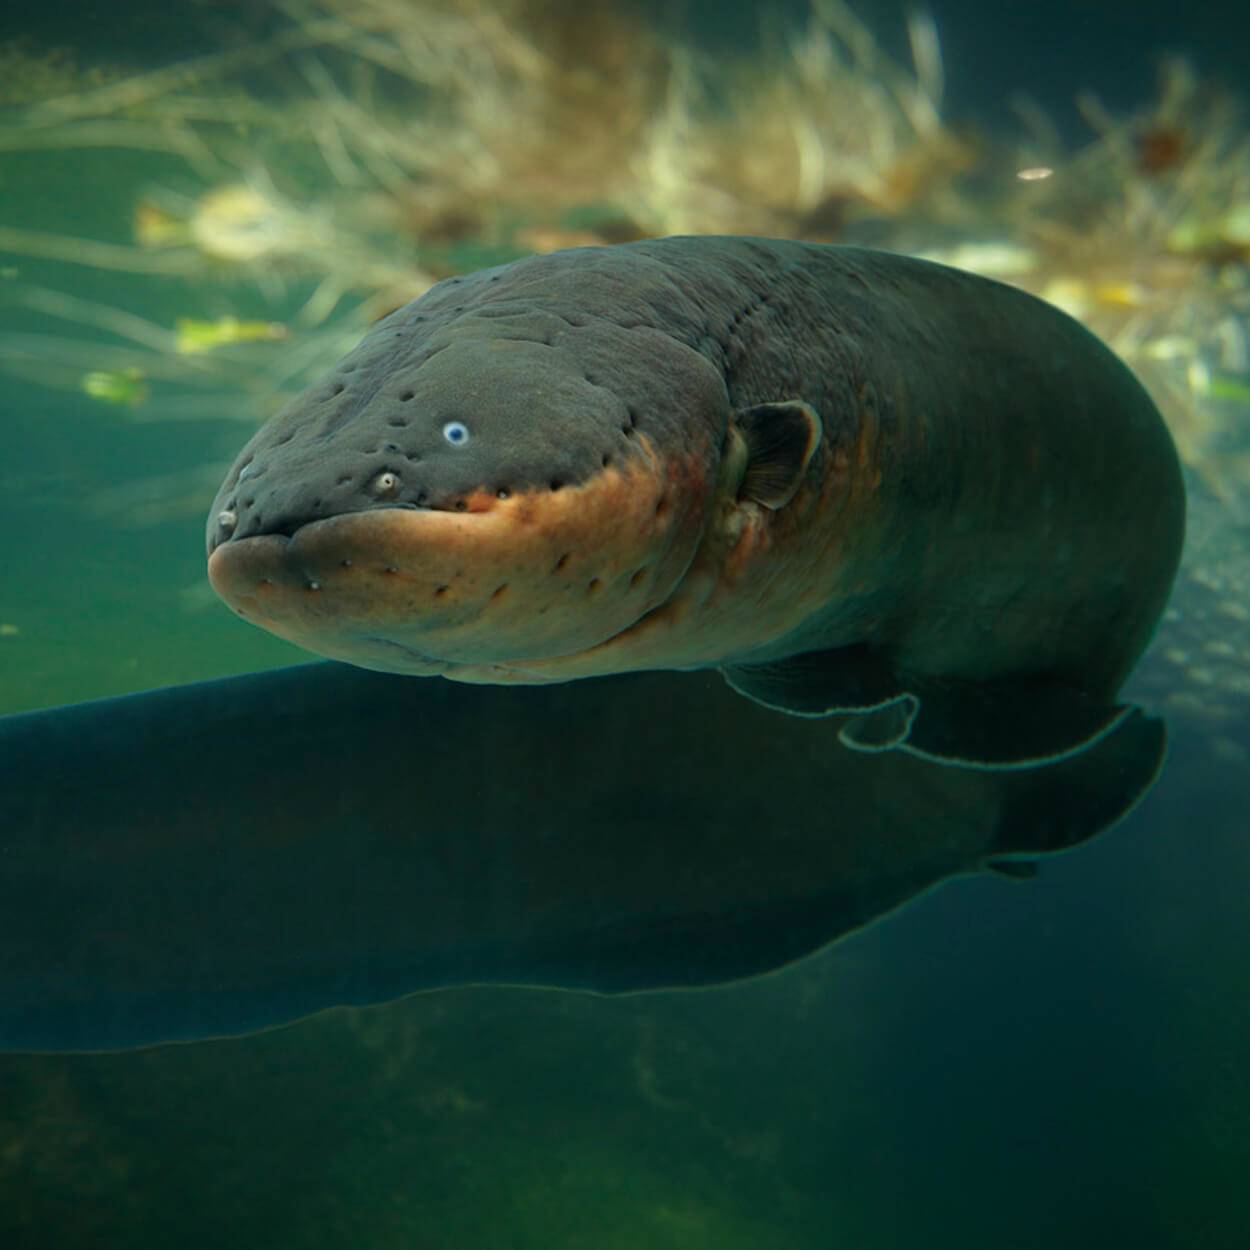 E. voltai: Species Electric Eel Fish can discharge electric shock